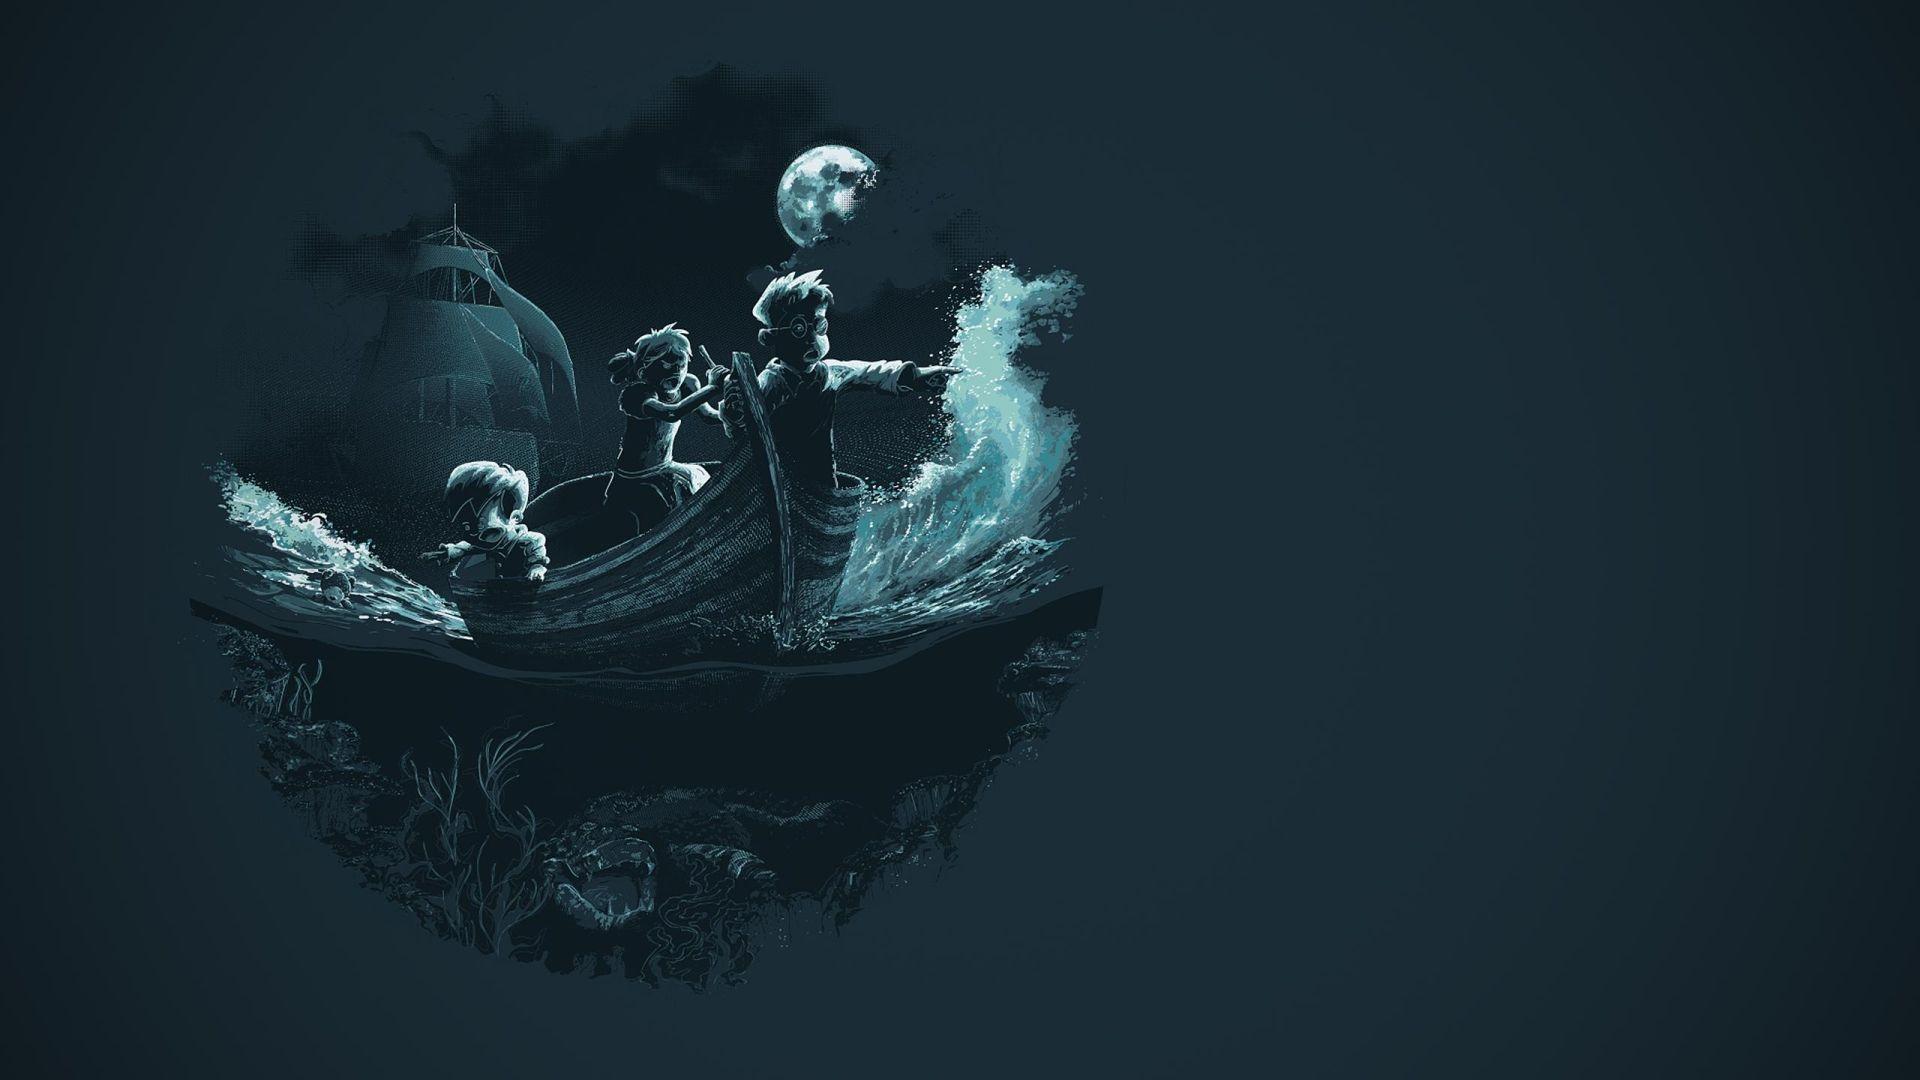 Peter Pan (1953) Full HD Wallpaper and Background Imagex1080